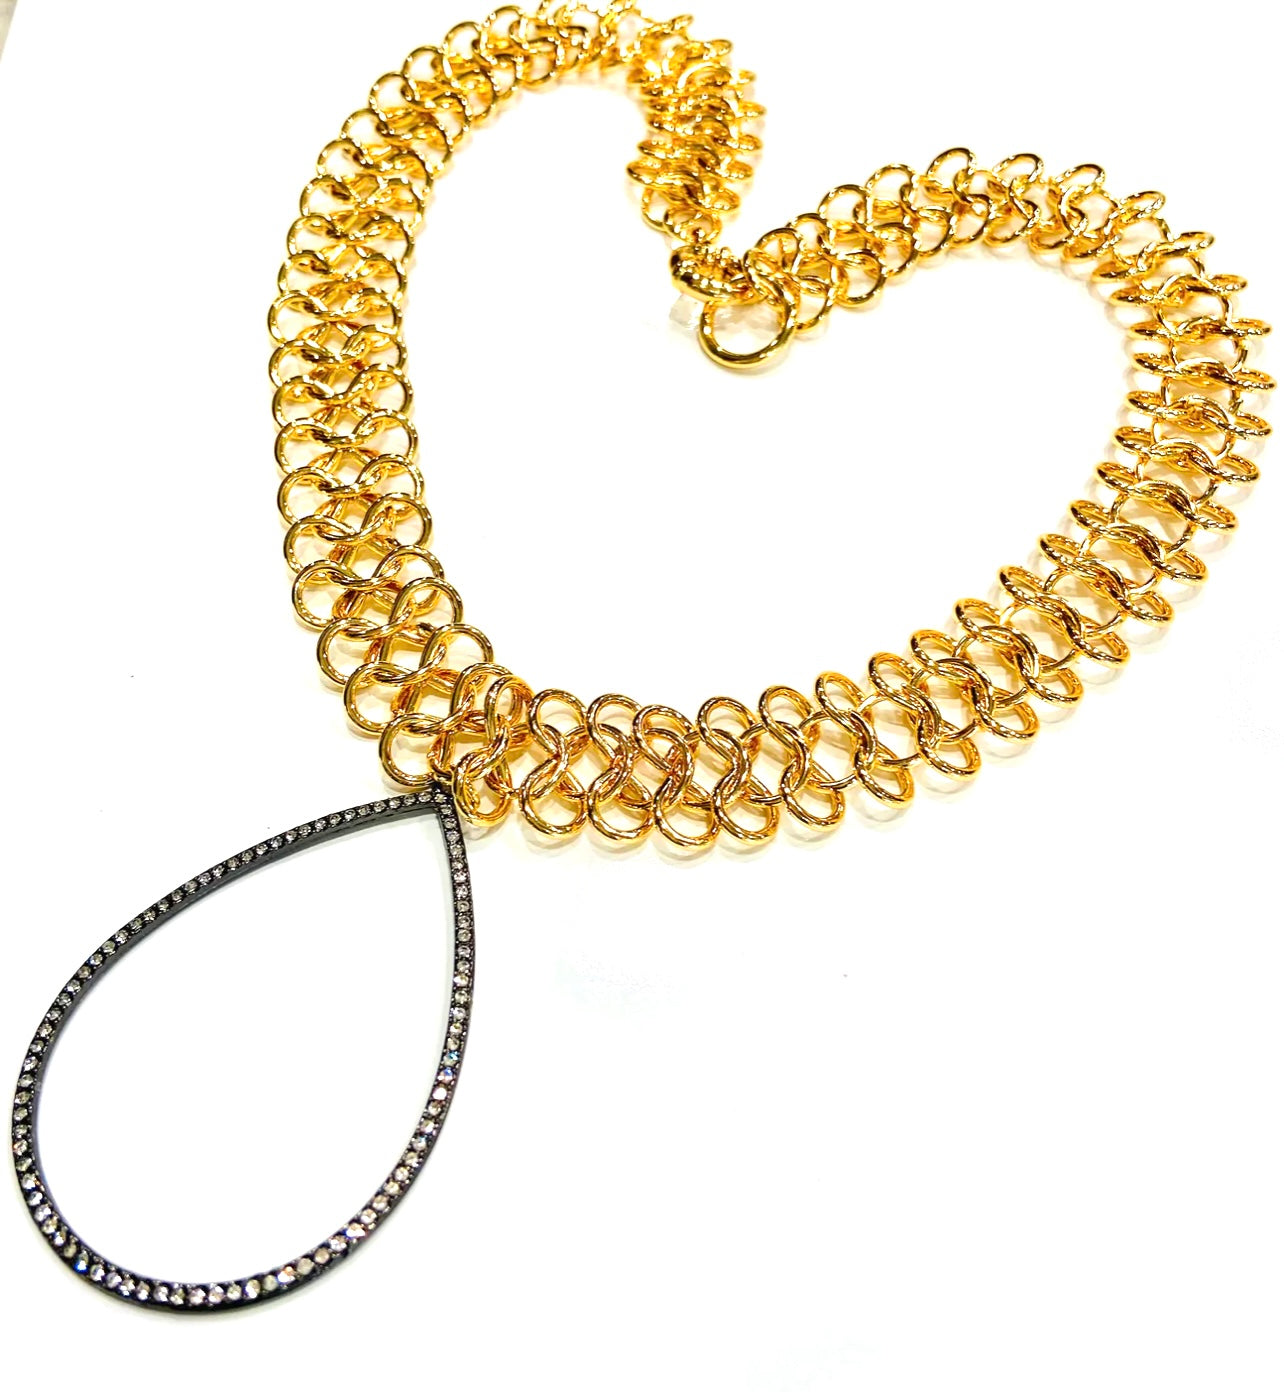 Double Loop Chain Necklace with Gunmetal Pave Pendant 18”